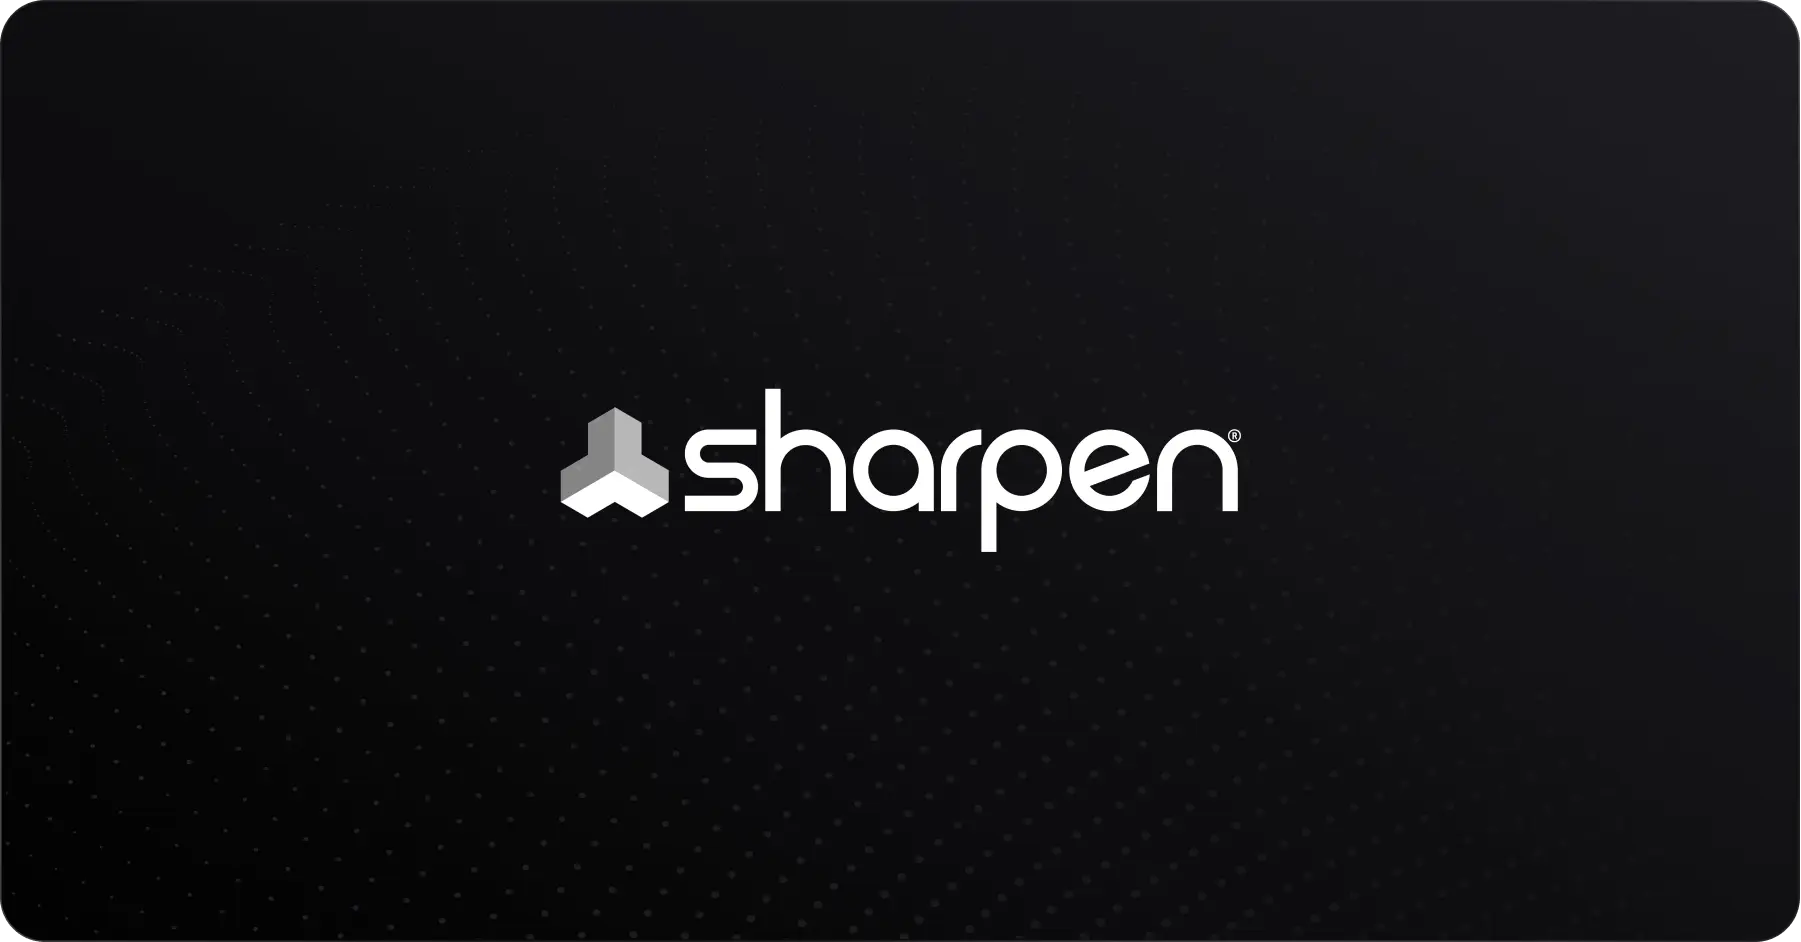 Sharpen Elevates the Contact Center Customer Experience with Deepgram